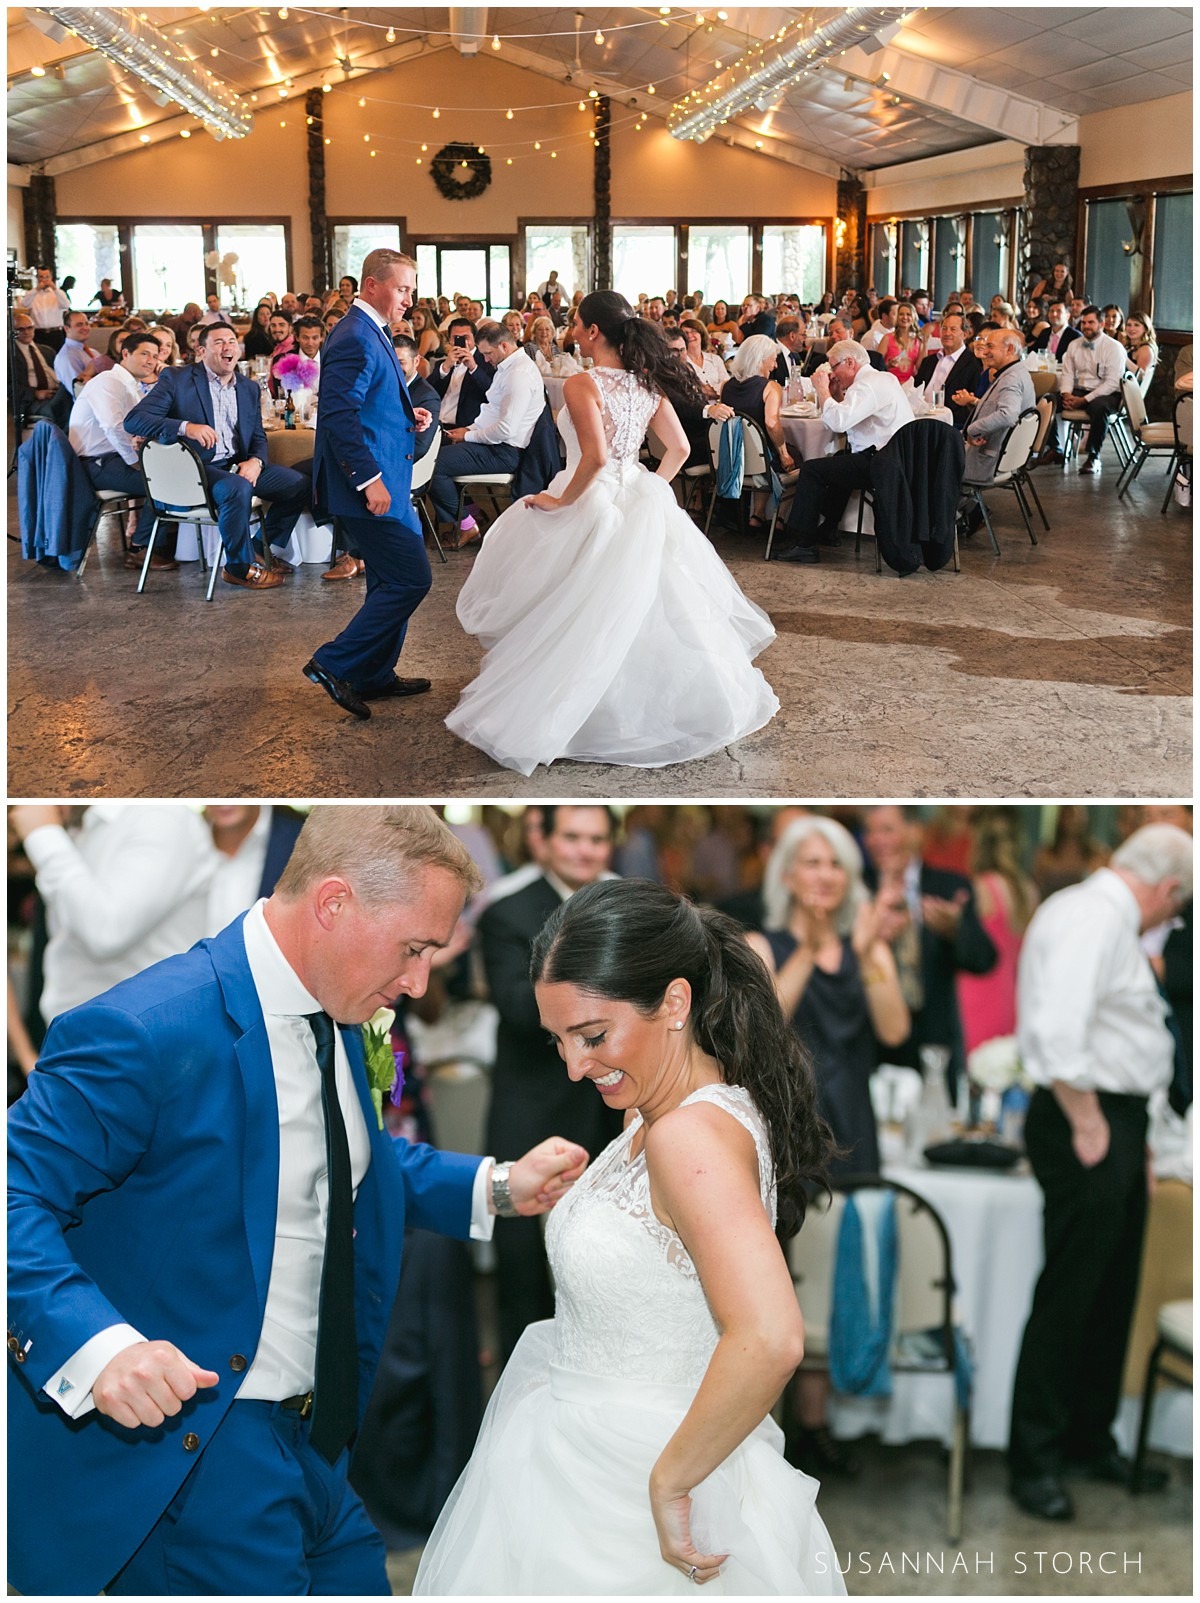 two images of a bride and groom dancing their first dance